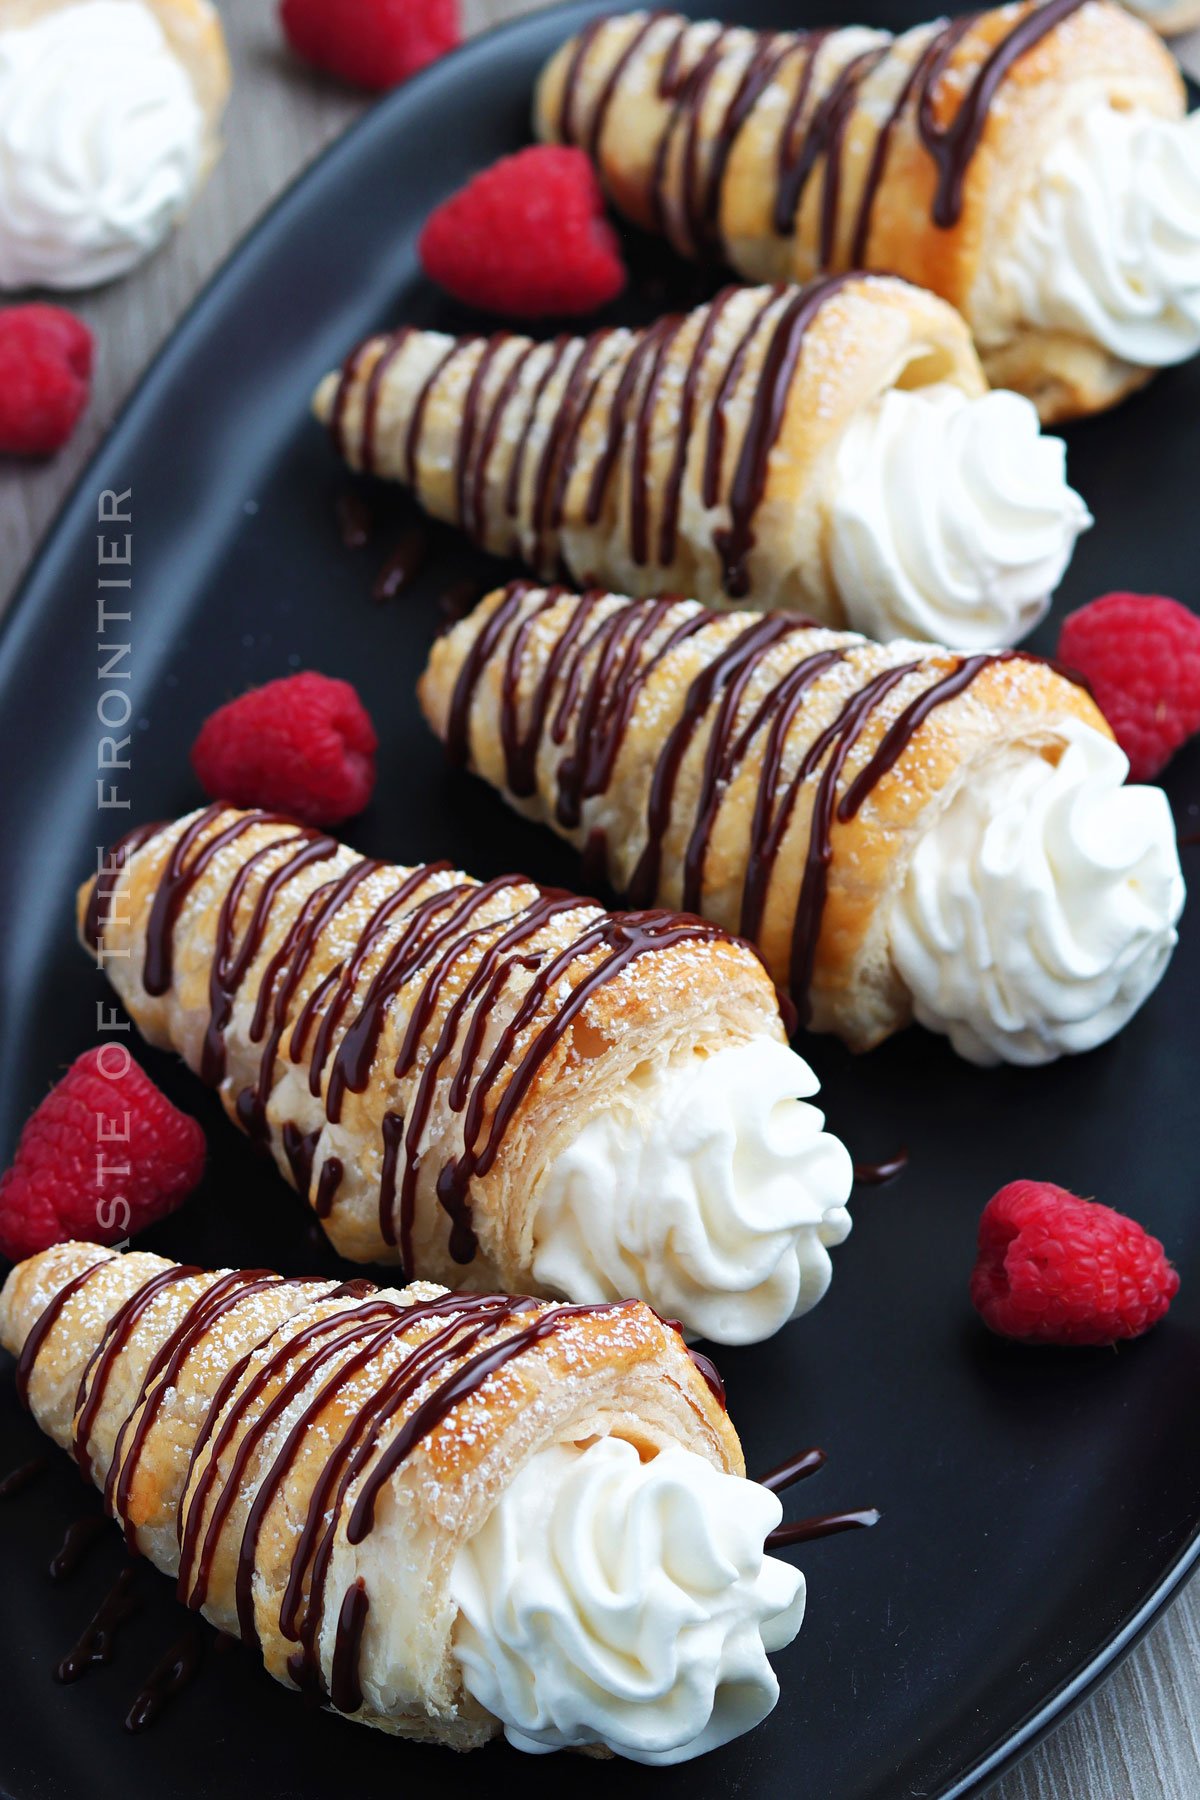 whipped cream filled pastries with chocolate